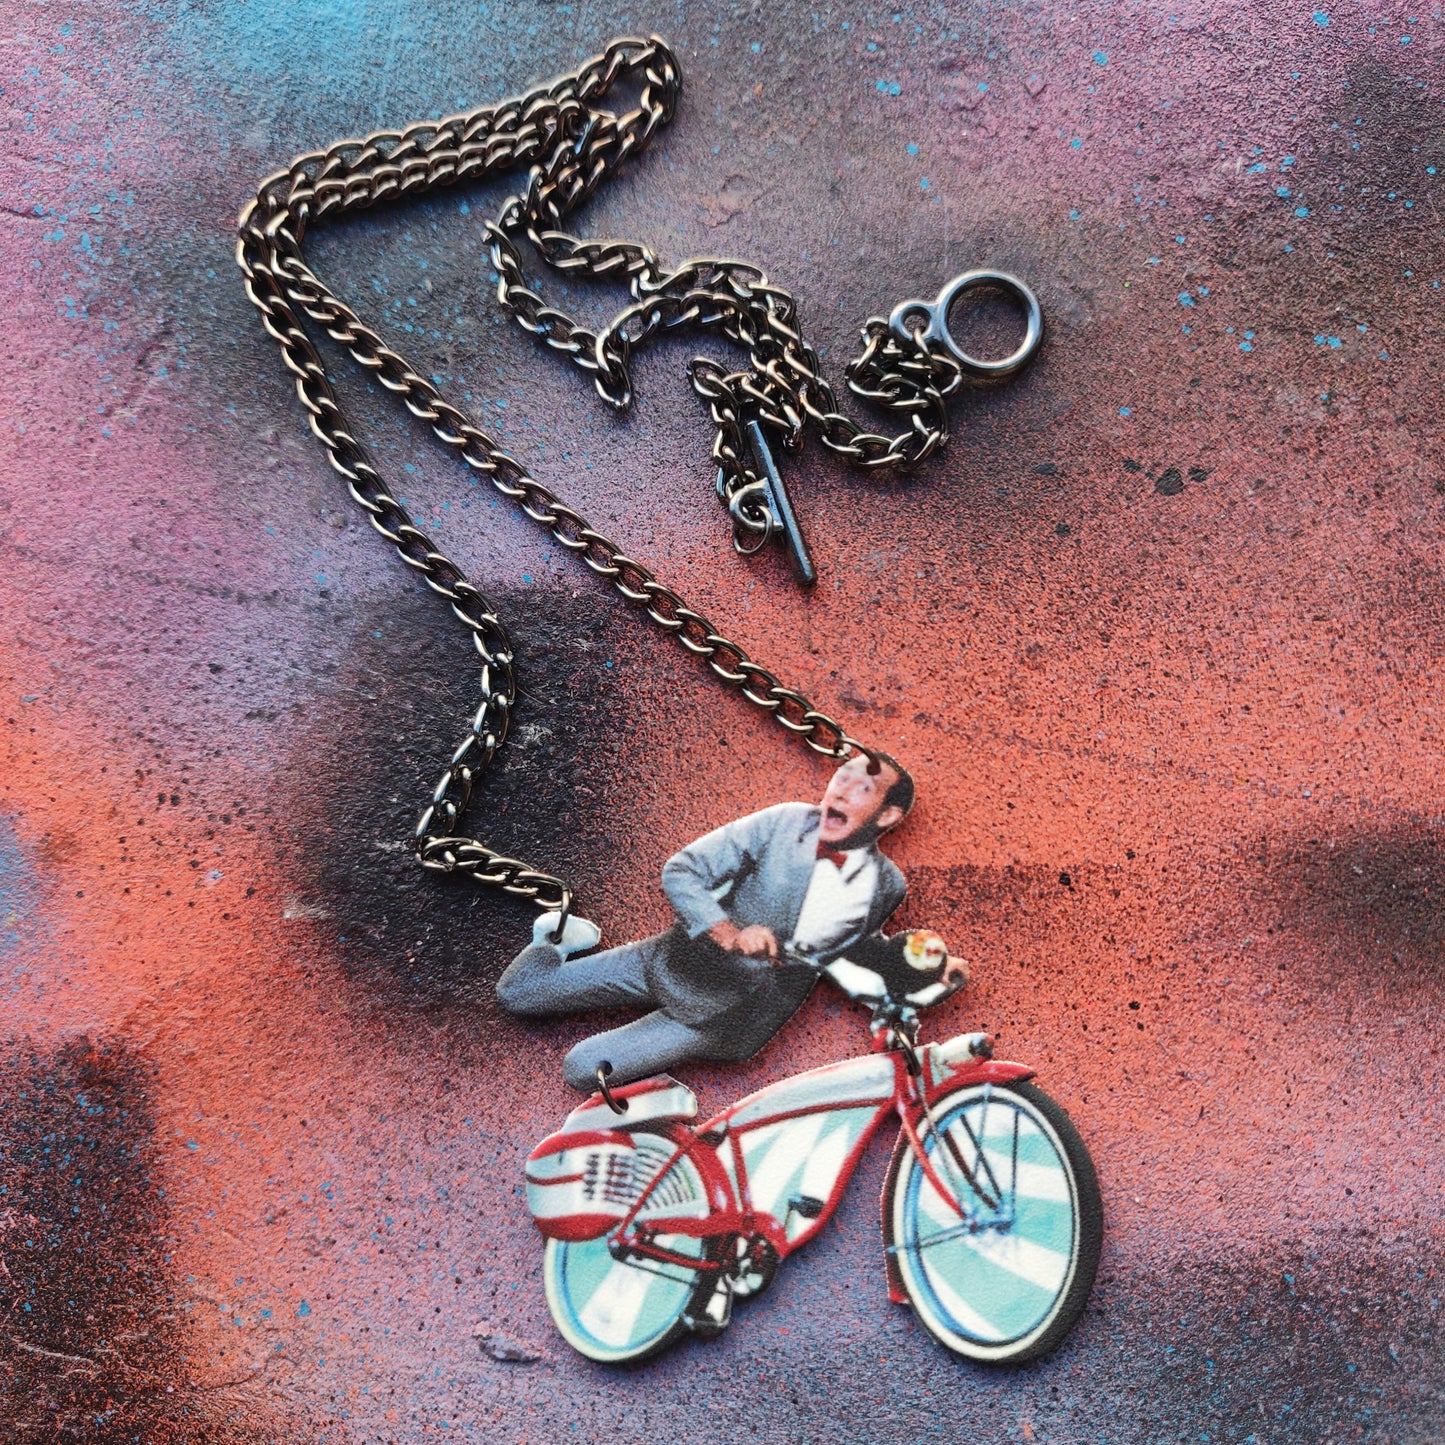 Pee Wee necklace